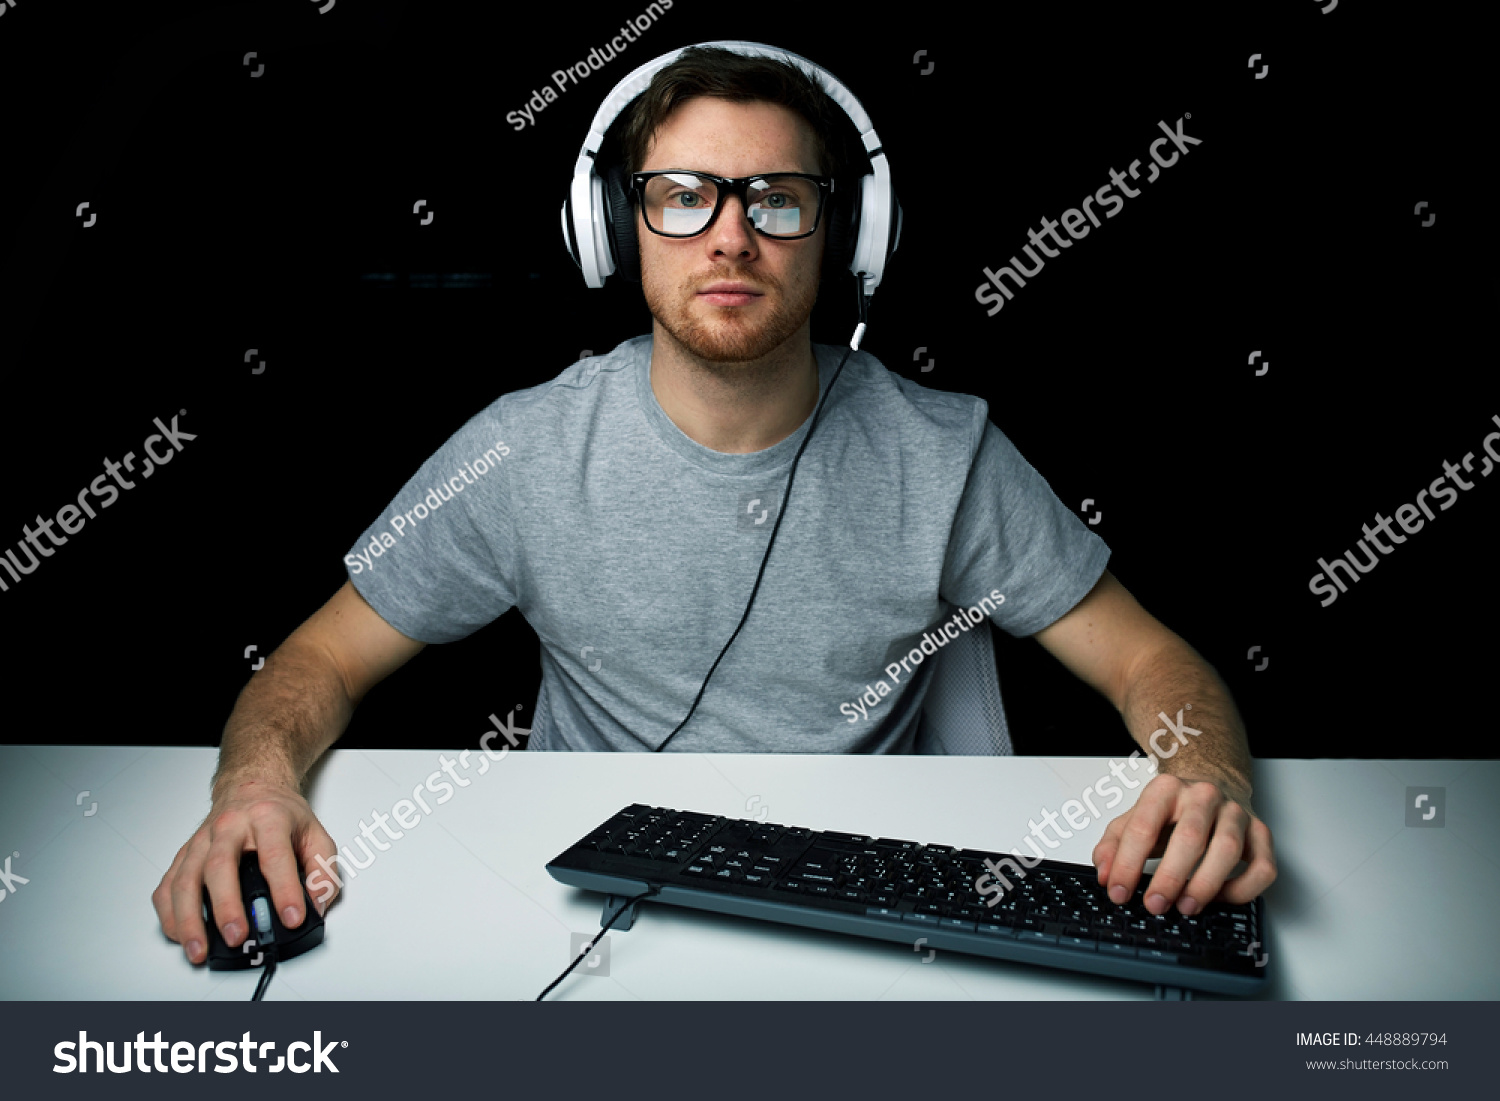 technology, gaming, let's play and people concept - young man or hacker in headset and eyeglasses with pc computer playing game and streaming playthrough or walkthrough video over black background #448889794